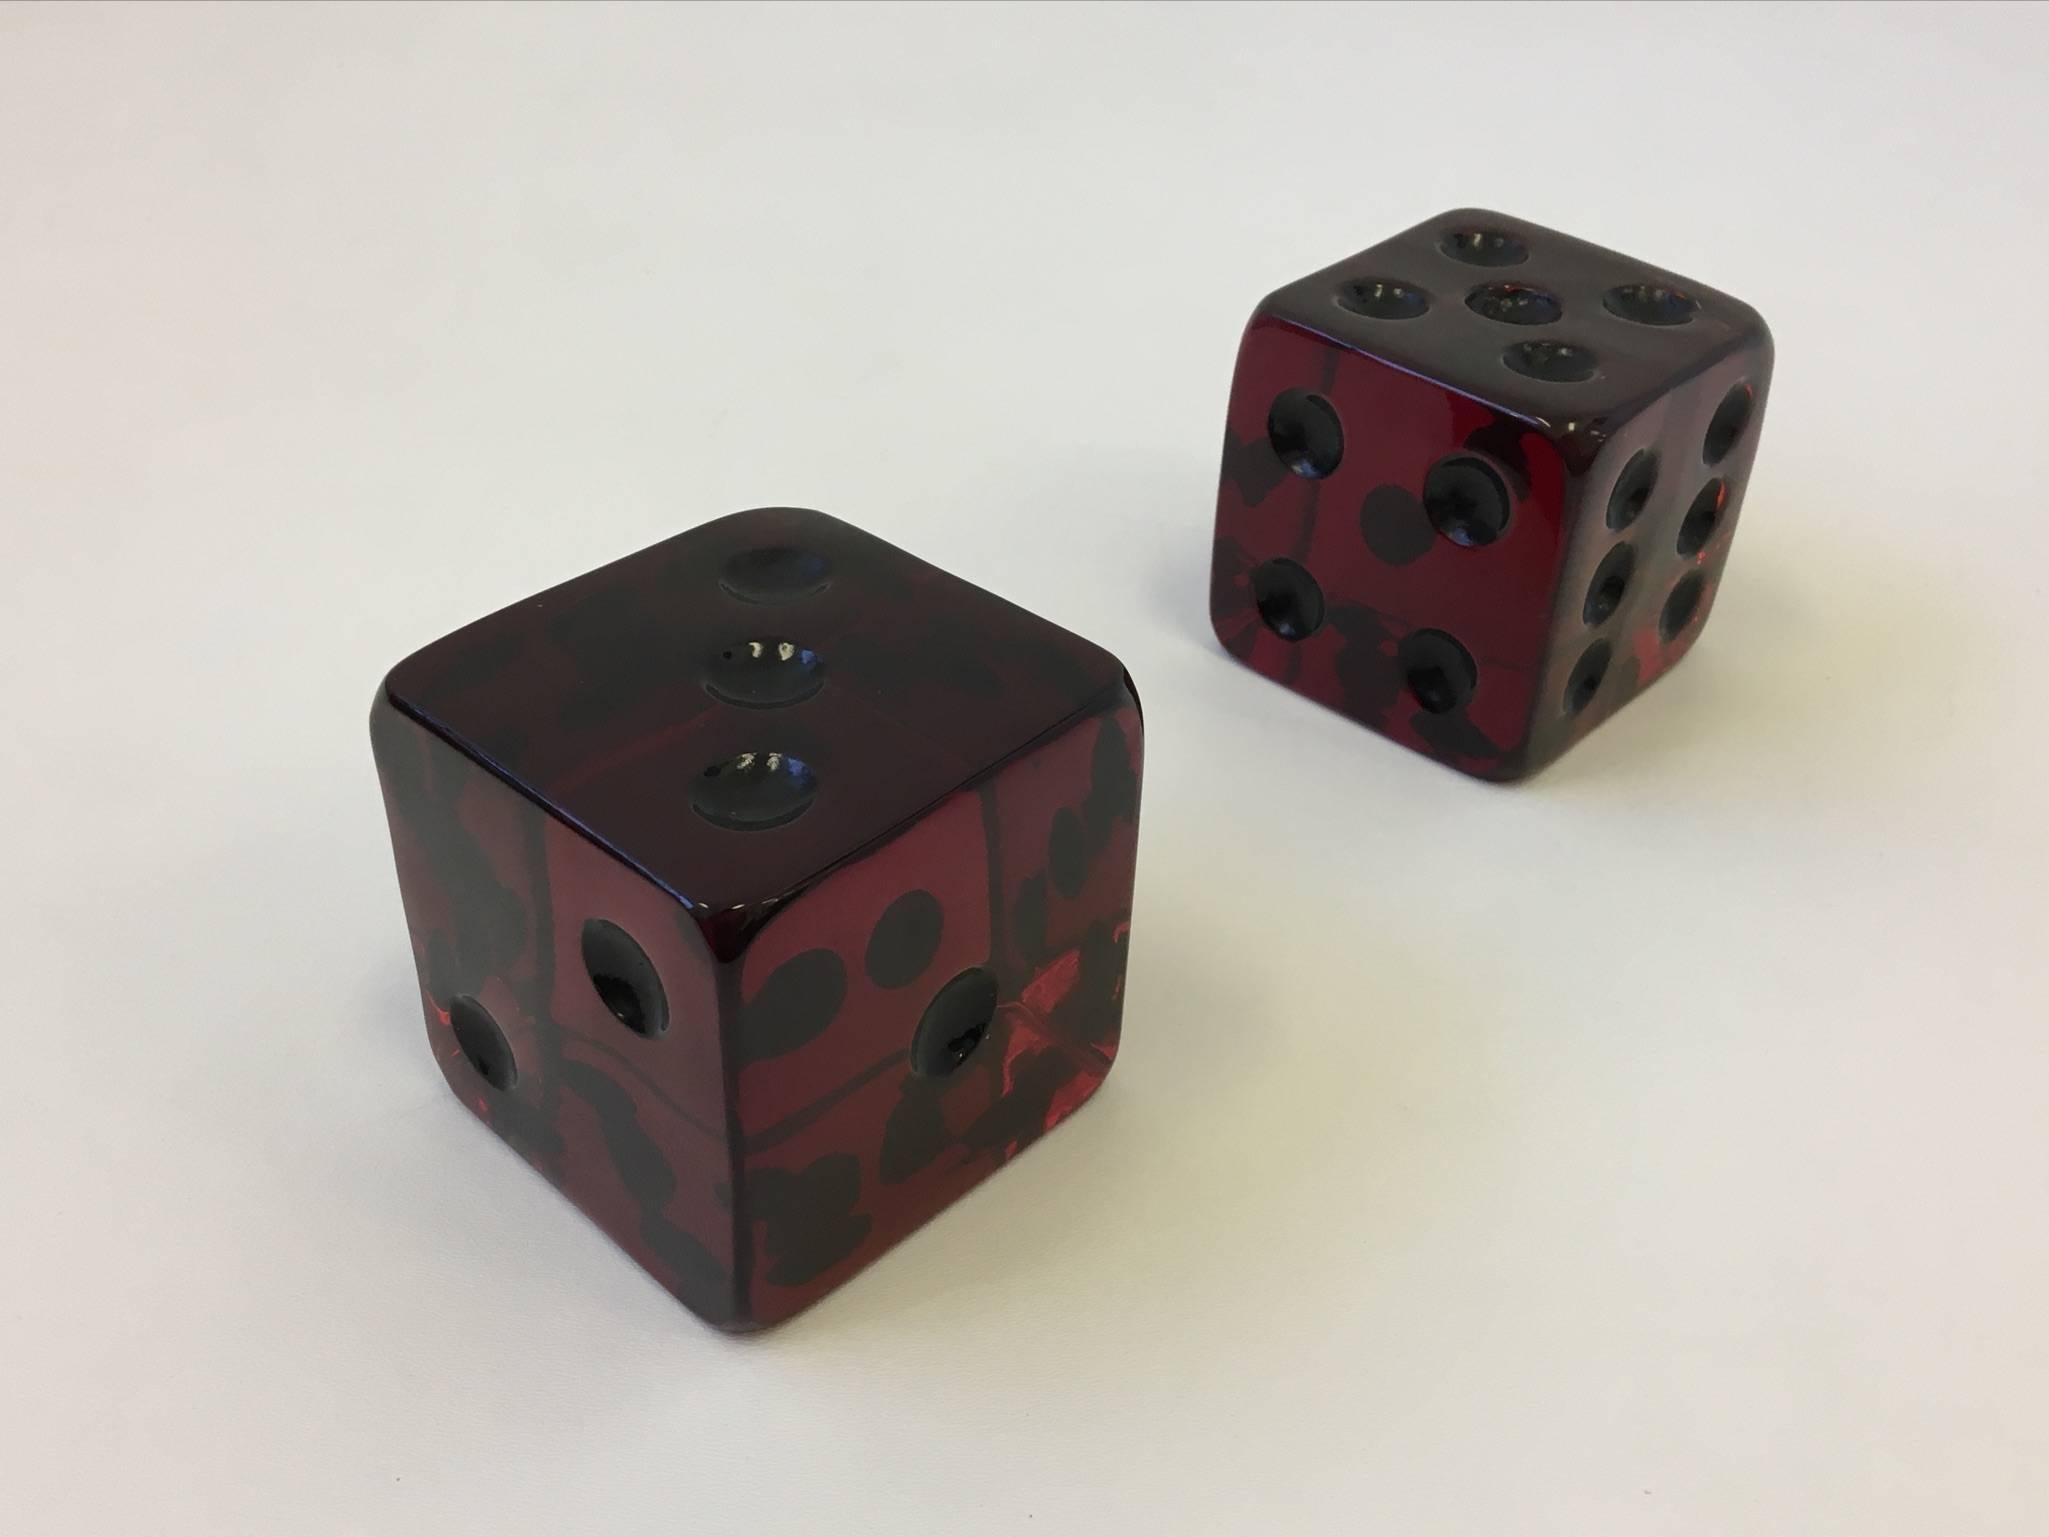 A pair of large-scale sculptural burgundy acrylic dice by renowned acrylic designer Mr. Acrylic Charles Hollis Jones. This can be used as bookends or as sculptures. This are from the 1970s 

Dimensions: 3.75